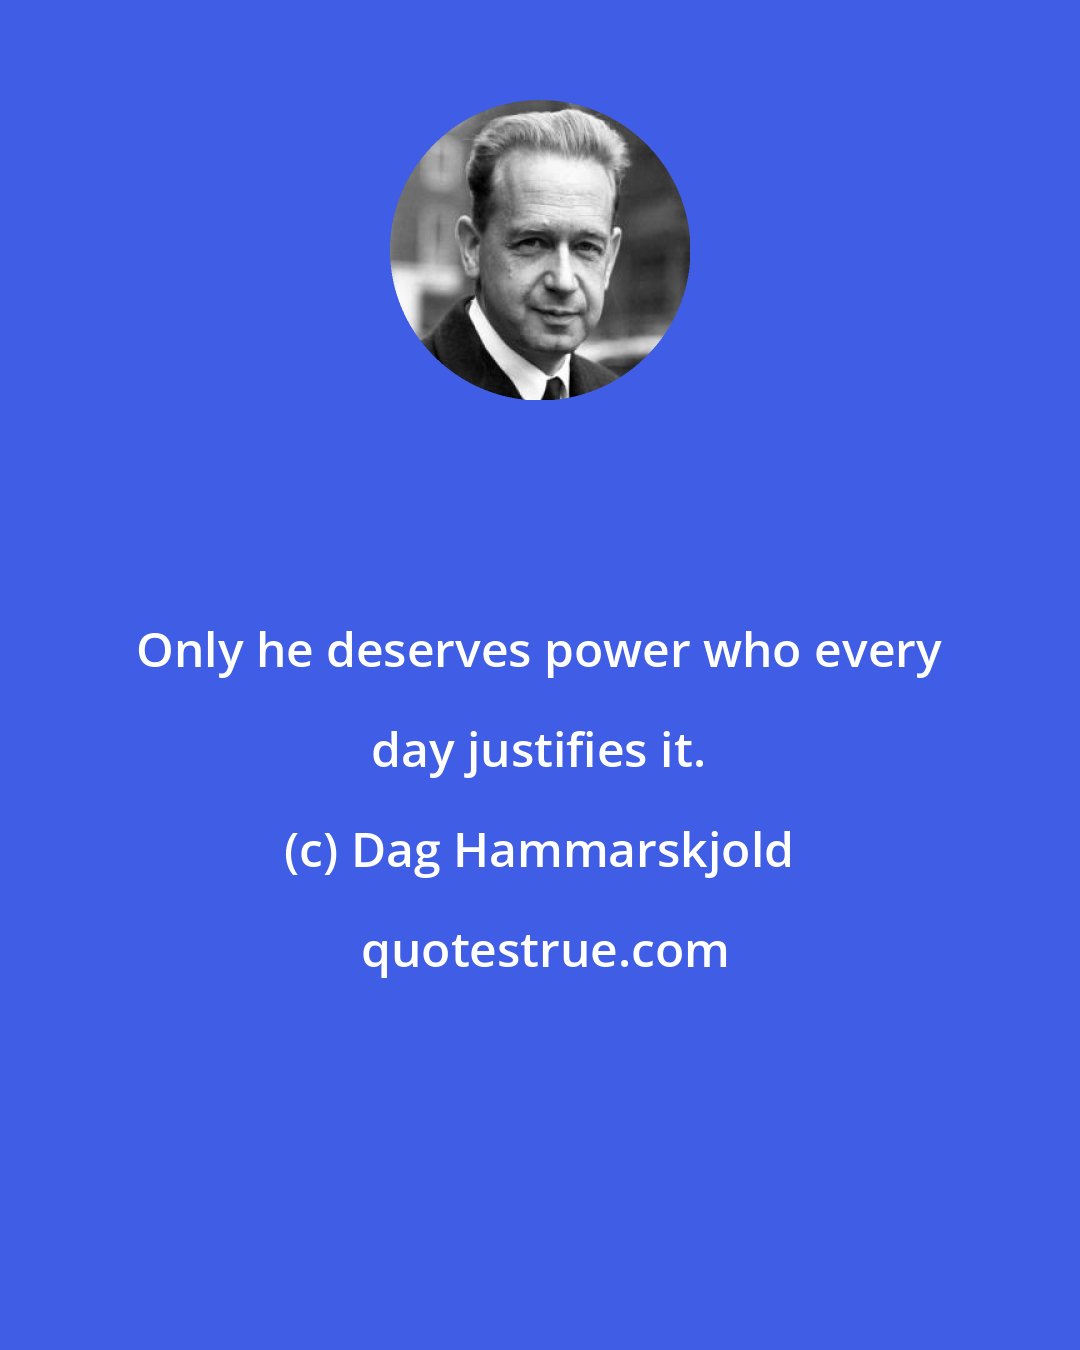 Dag Hammarskjold: Only he deserves power who every day justifies it.